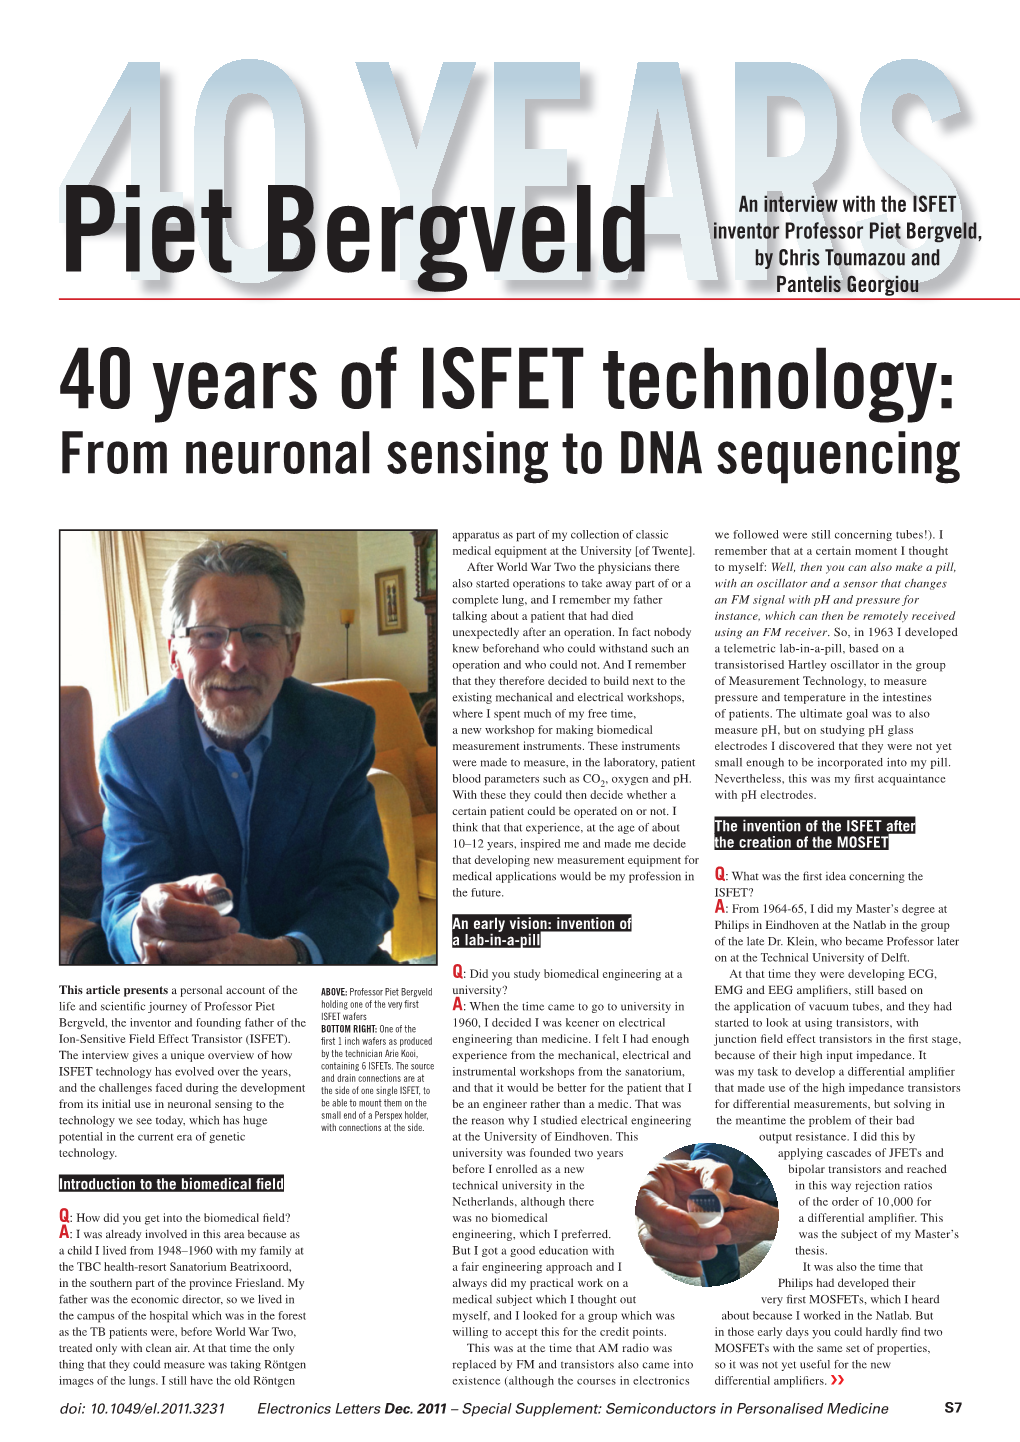 40 Years of ISFET Technology: from Neuronal Sensing to DNA Sequencing